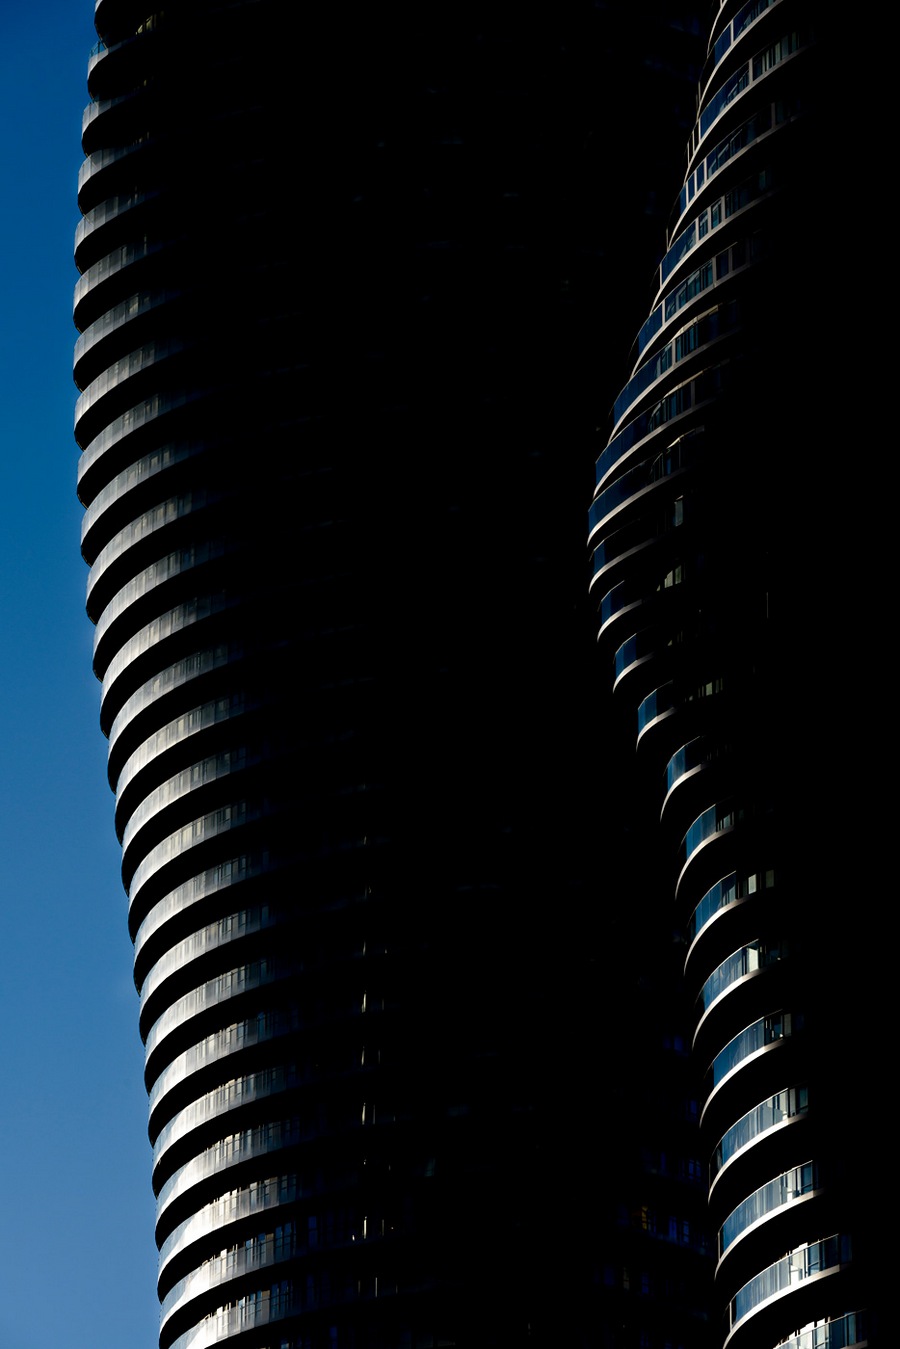 Shortlisted: Large + Bounhar. Exteriors. Project: Absolute Towers (CANADA) by MAD Architects